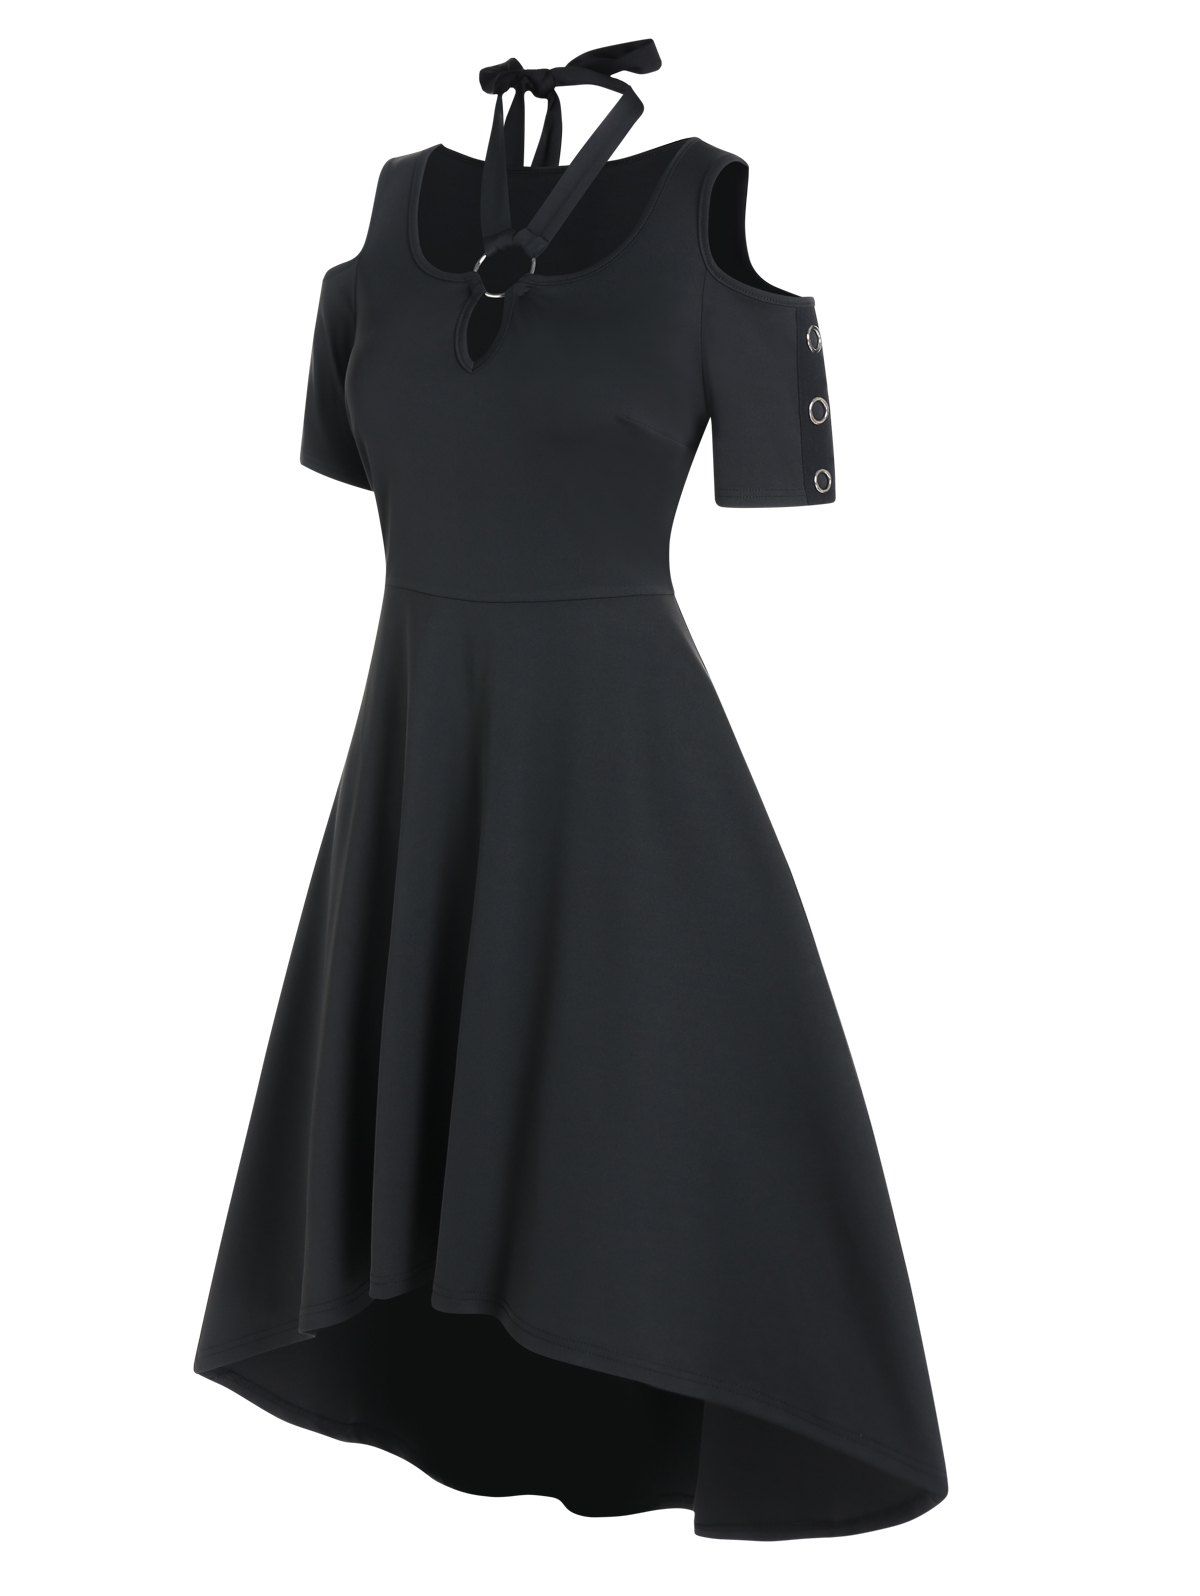 Casual Dress Solid Color Dress Cut Out Cold Shoulder Tied High Waist High Low Midi Dress - BLACK M